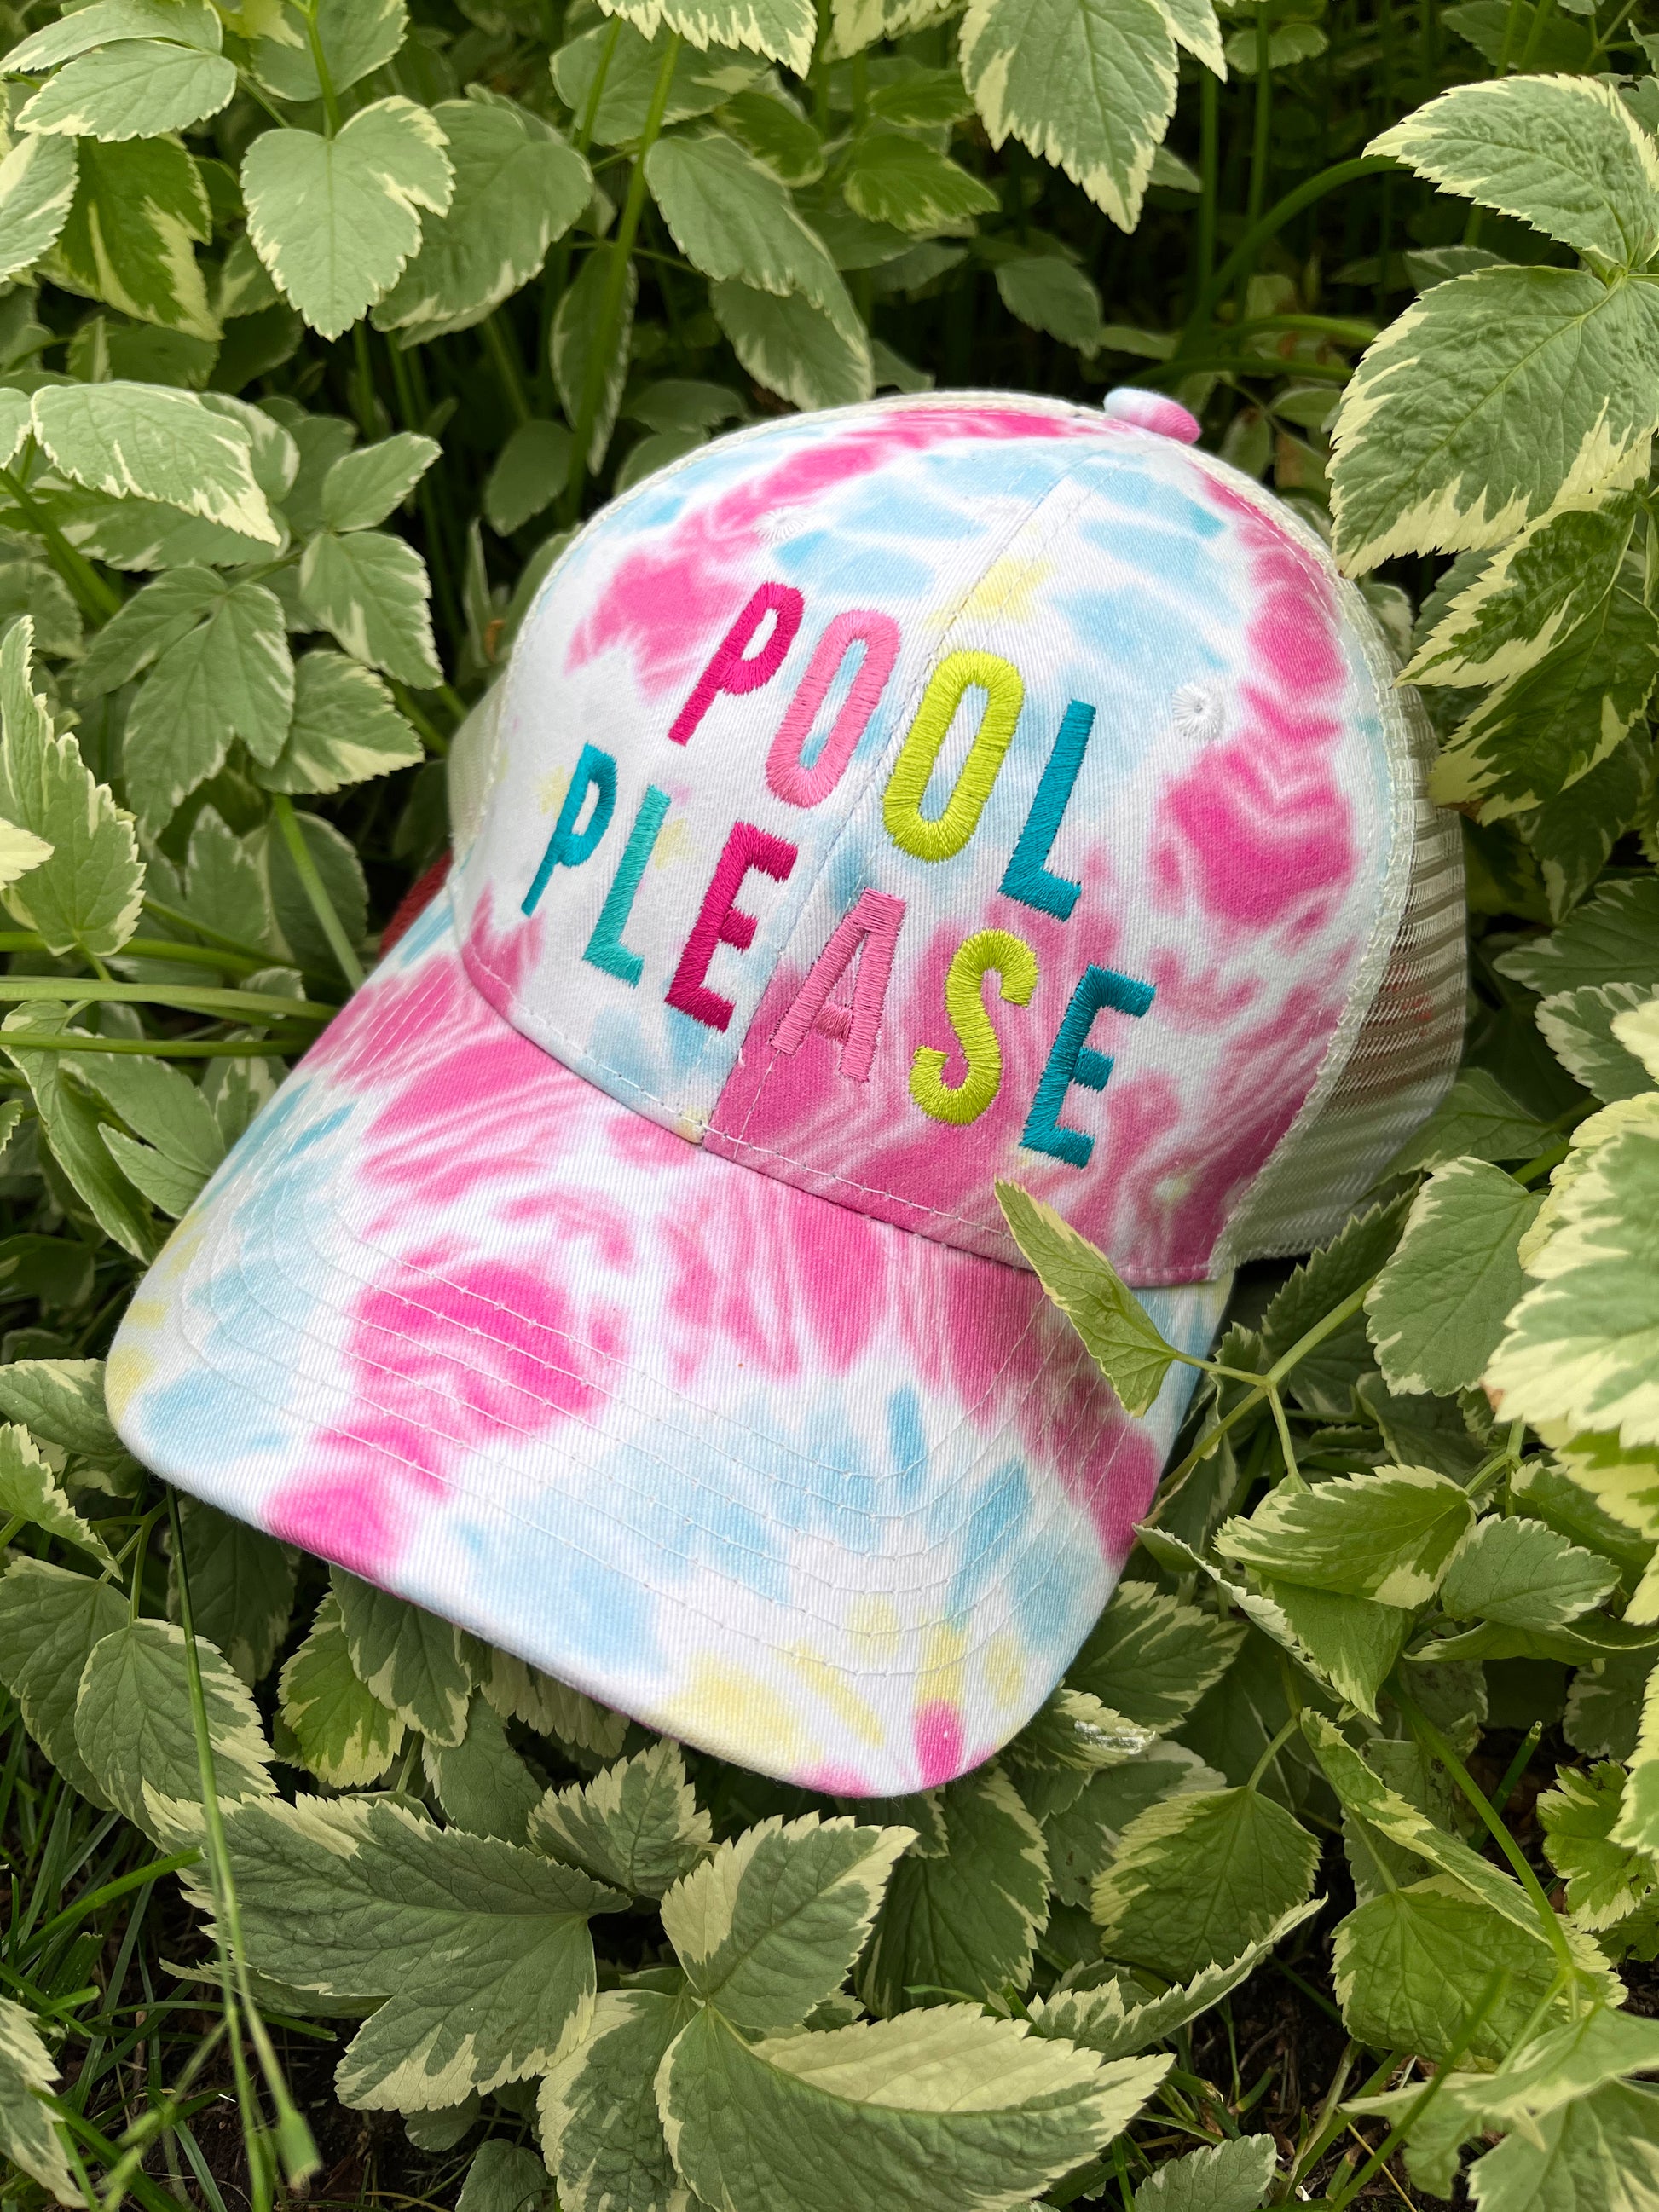 Pool Hats Embroidered Gray Distressed unisex Trucker Caps Pool Hair Dont Care Pool Please Flamingos Flip Flops Pool Hair Dont Care. Gray Hat. Teal